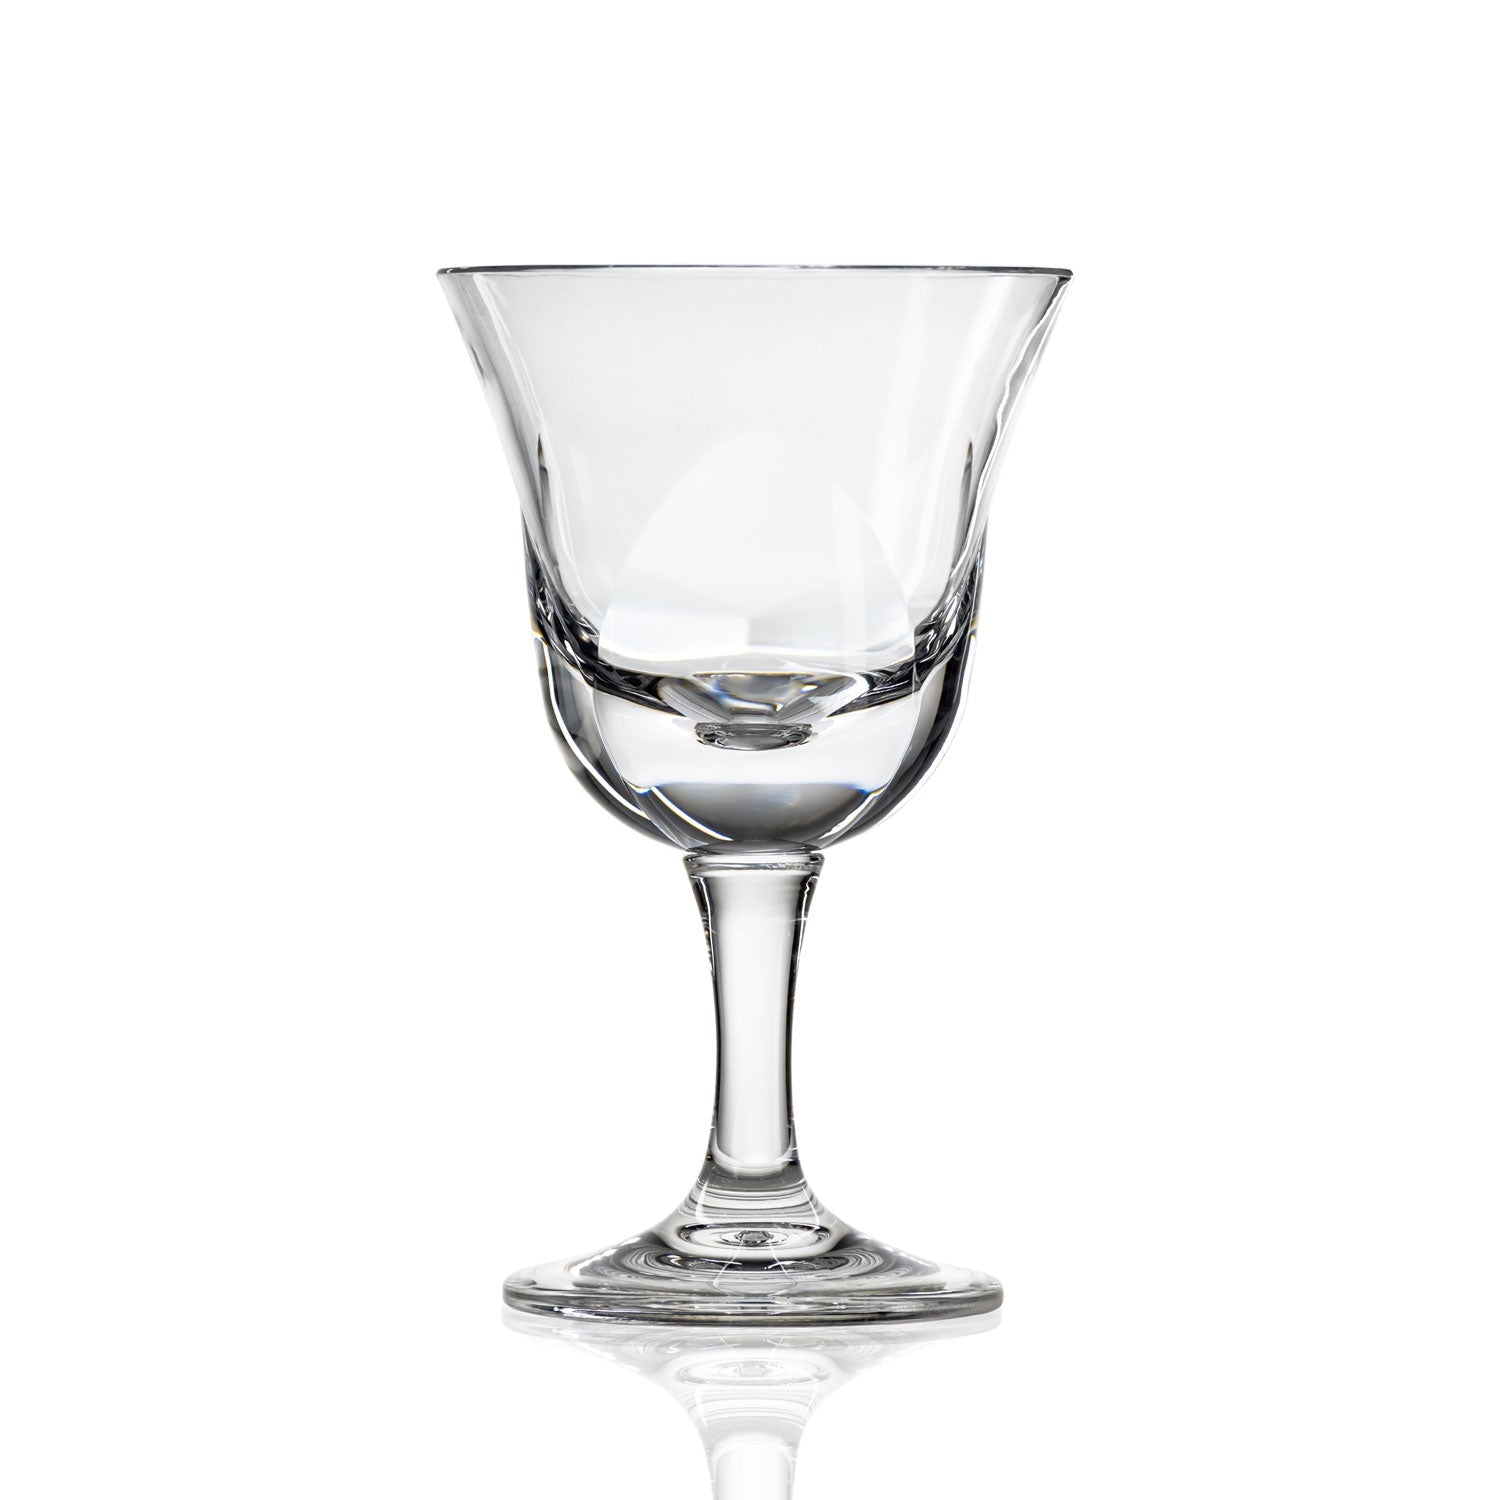 10-ounce clear acrylic wine glass in the Fiori collection by Merritt Designs. Front view on white background